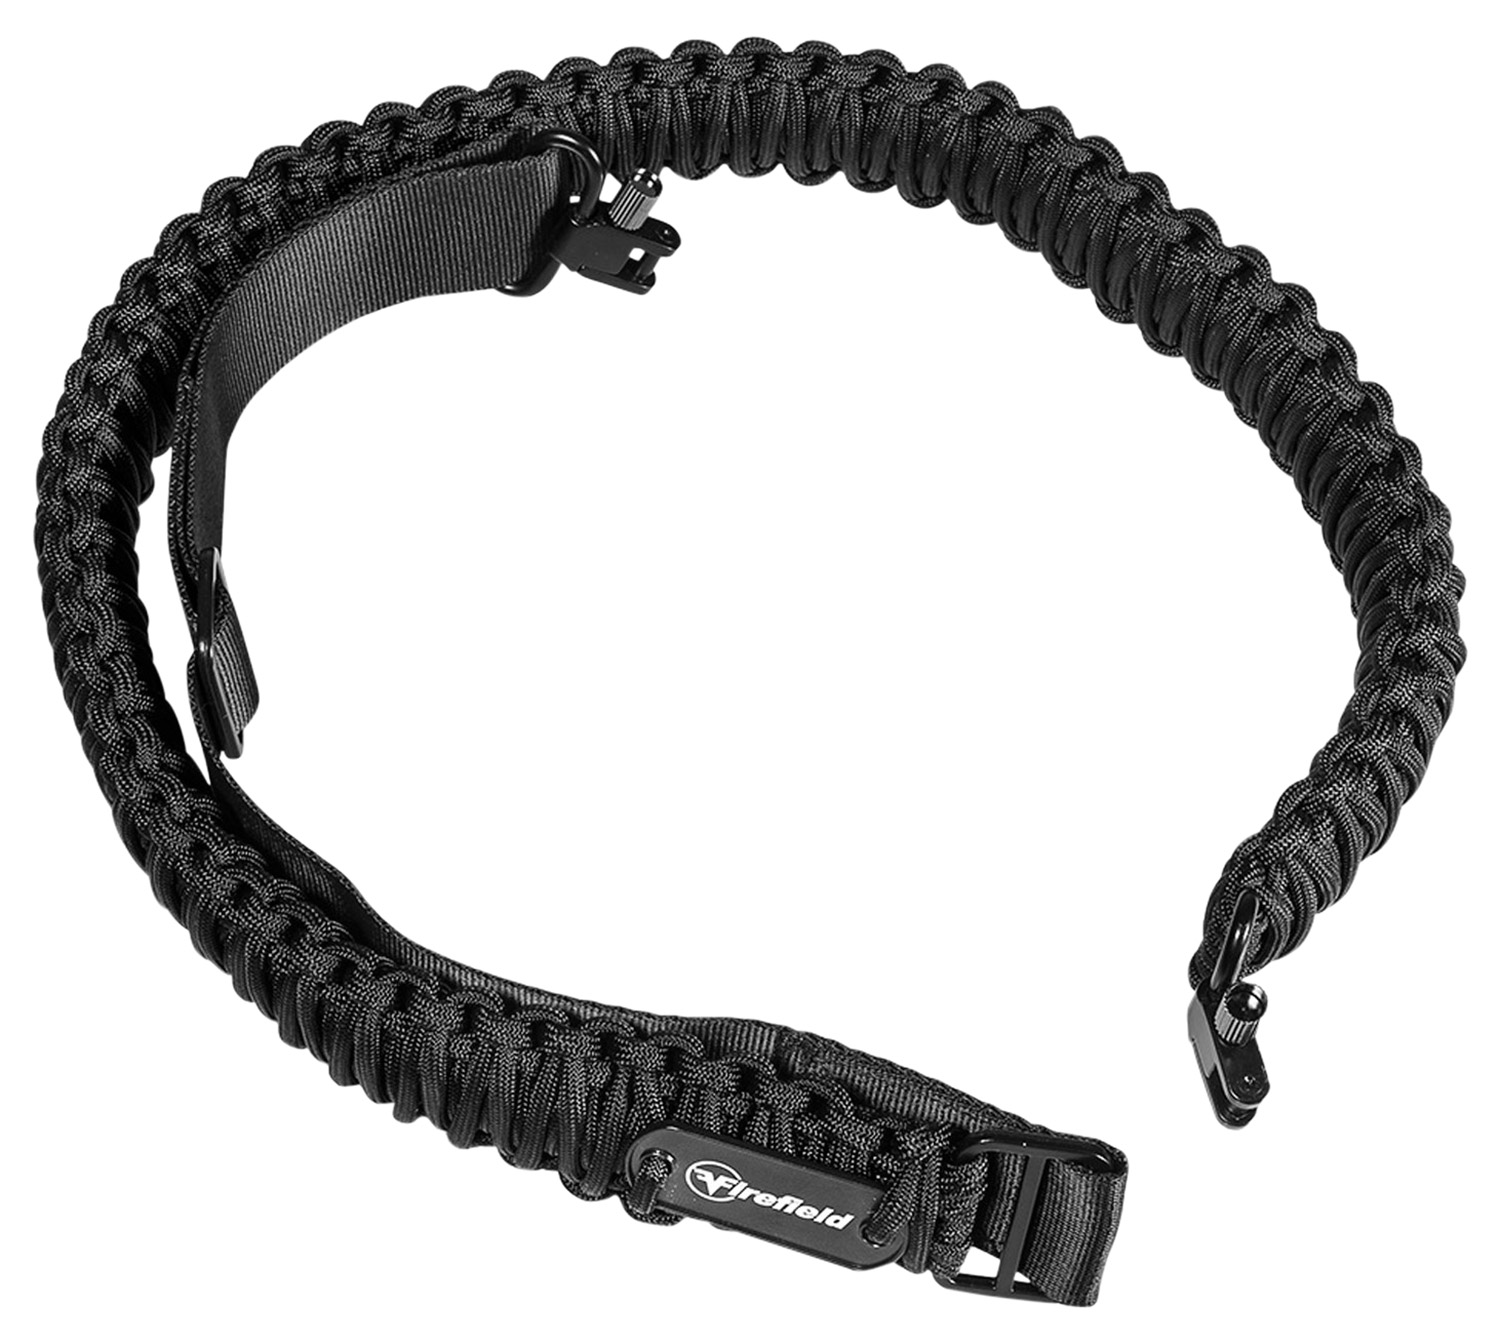 Firefield FF46001 Two Point Tactical Sling made of Black Nylon Paracord with 37.50